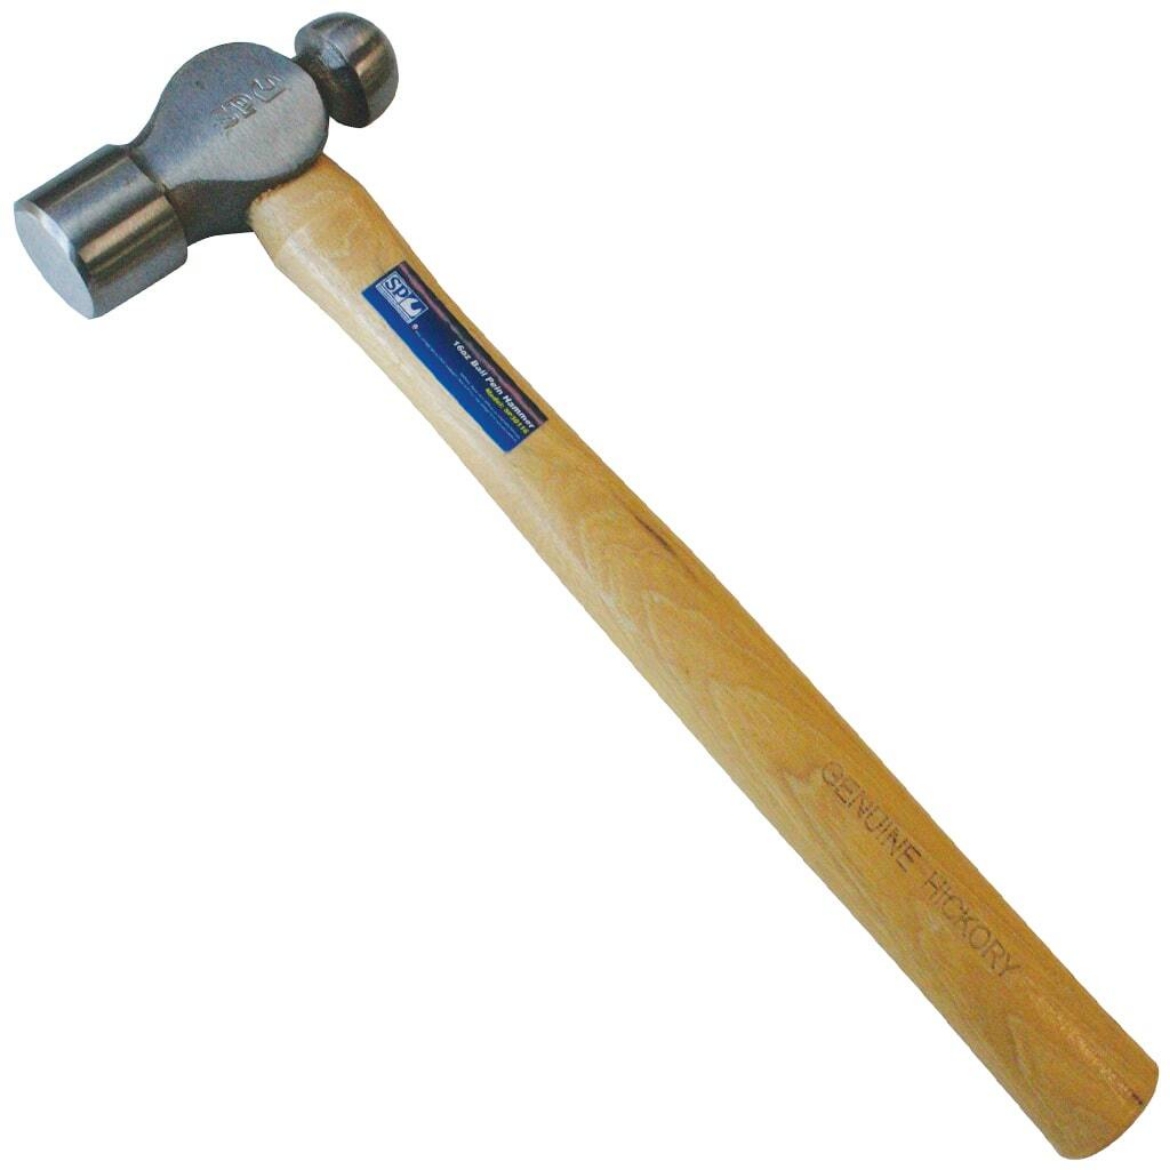 Picture of Ball Pein Hammer 1lb(16oz)/454g, Hickory Handle